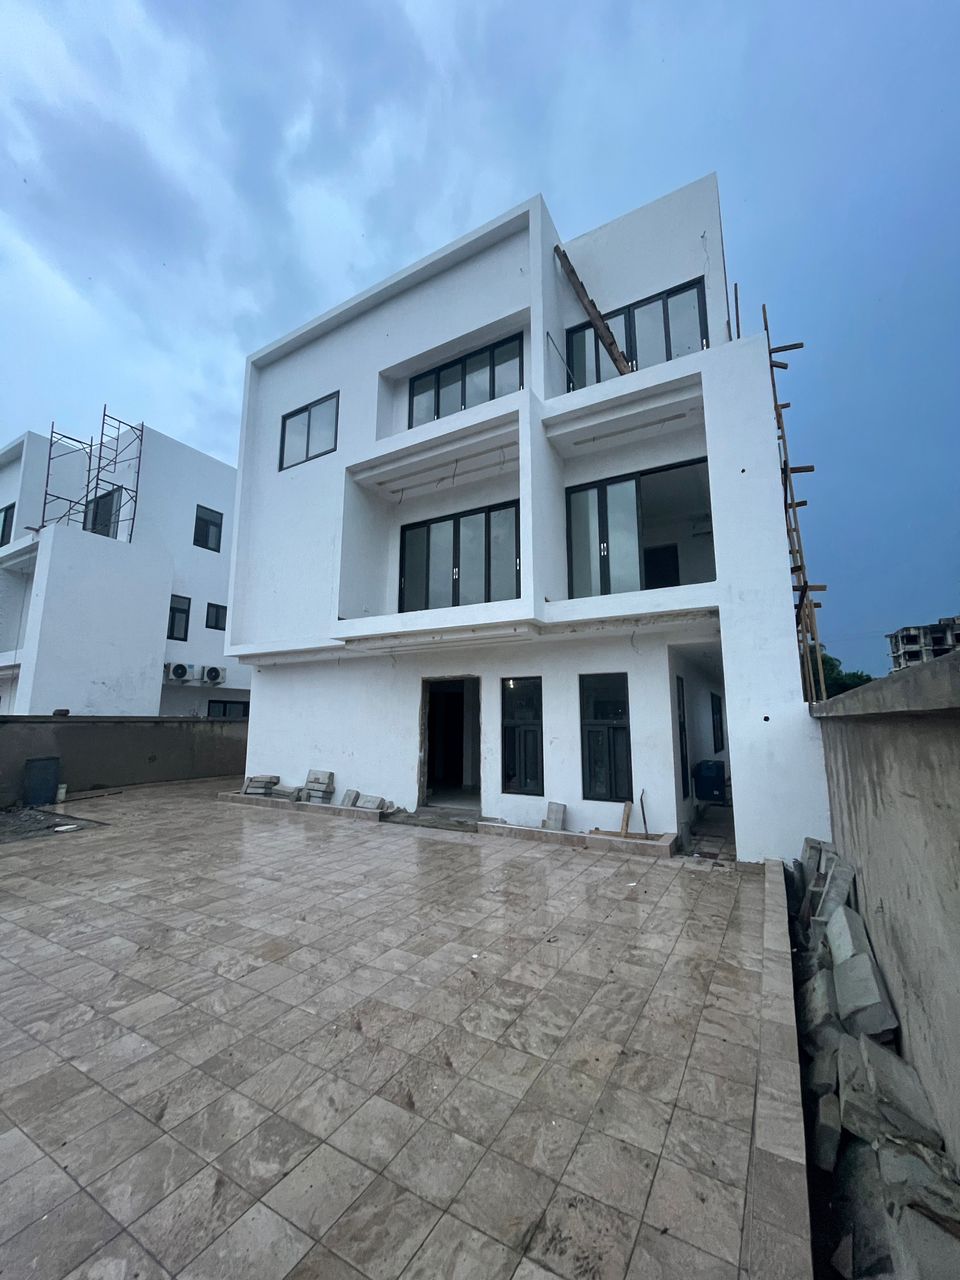 5 BEDROOM HOUSE FOR SALE AT AIRPORT RESIDENTIAL AREA